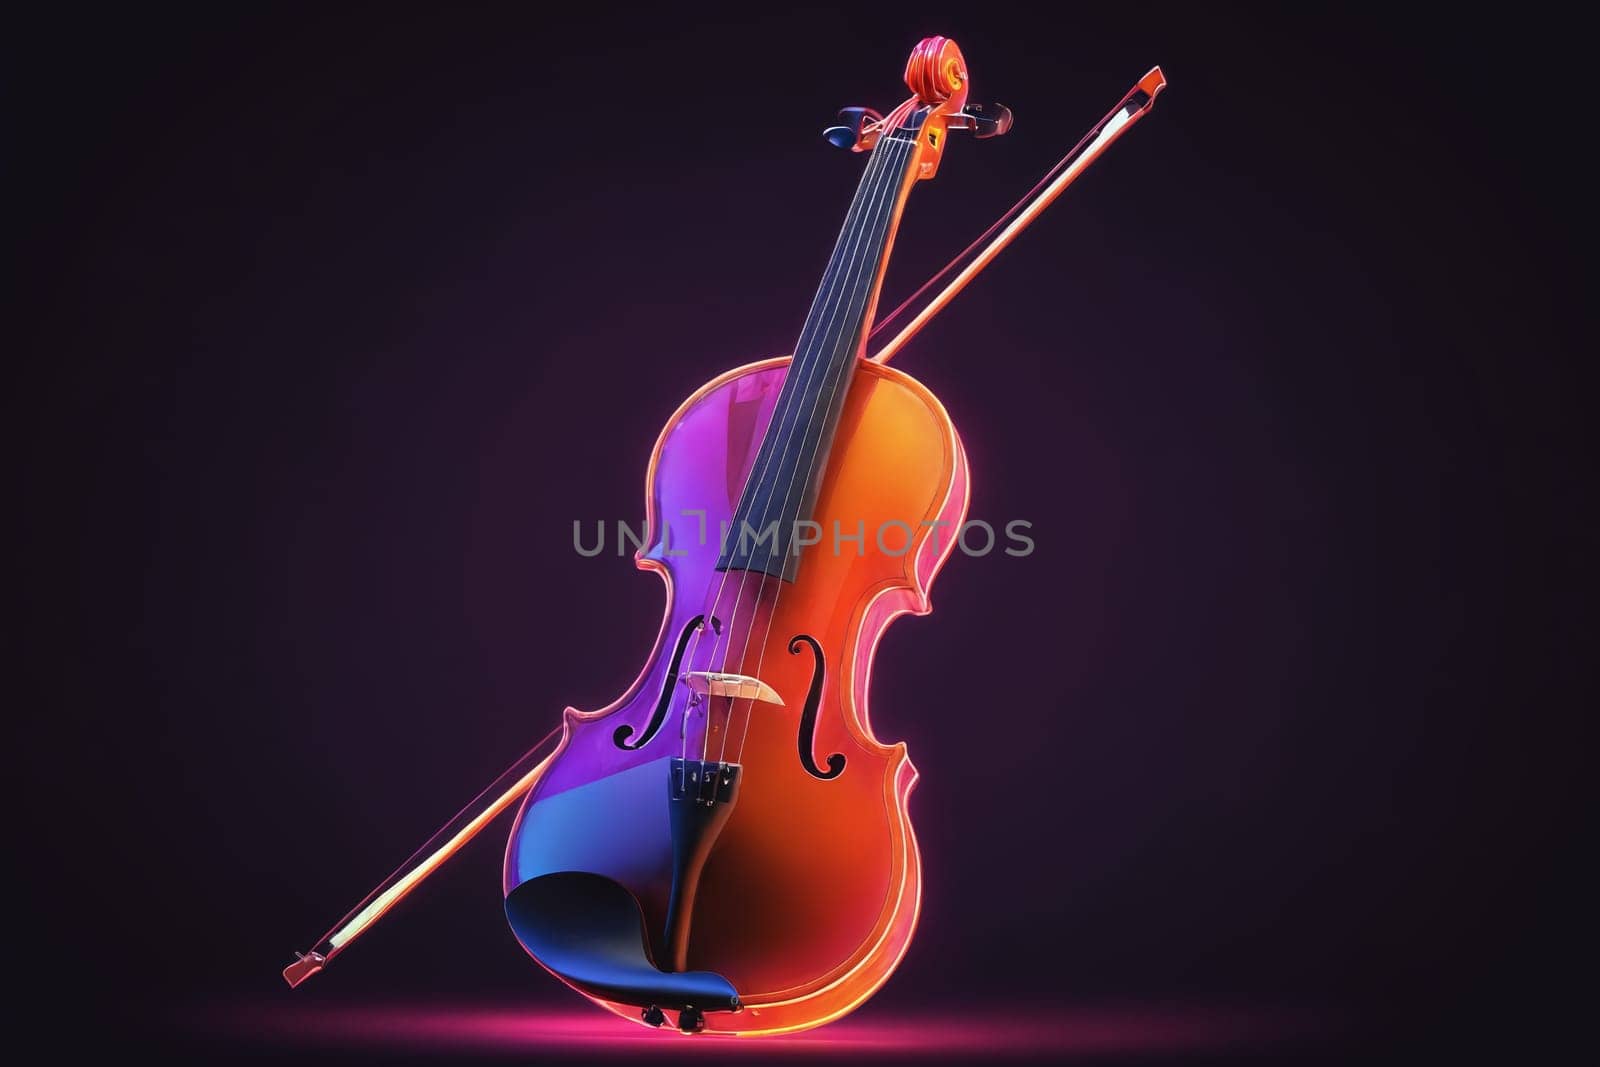 Neon Glow: Violin and Bow in a Symphony of Purple Light by Andre1ns